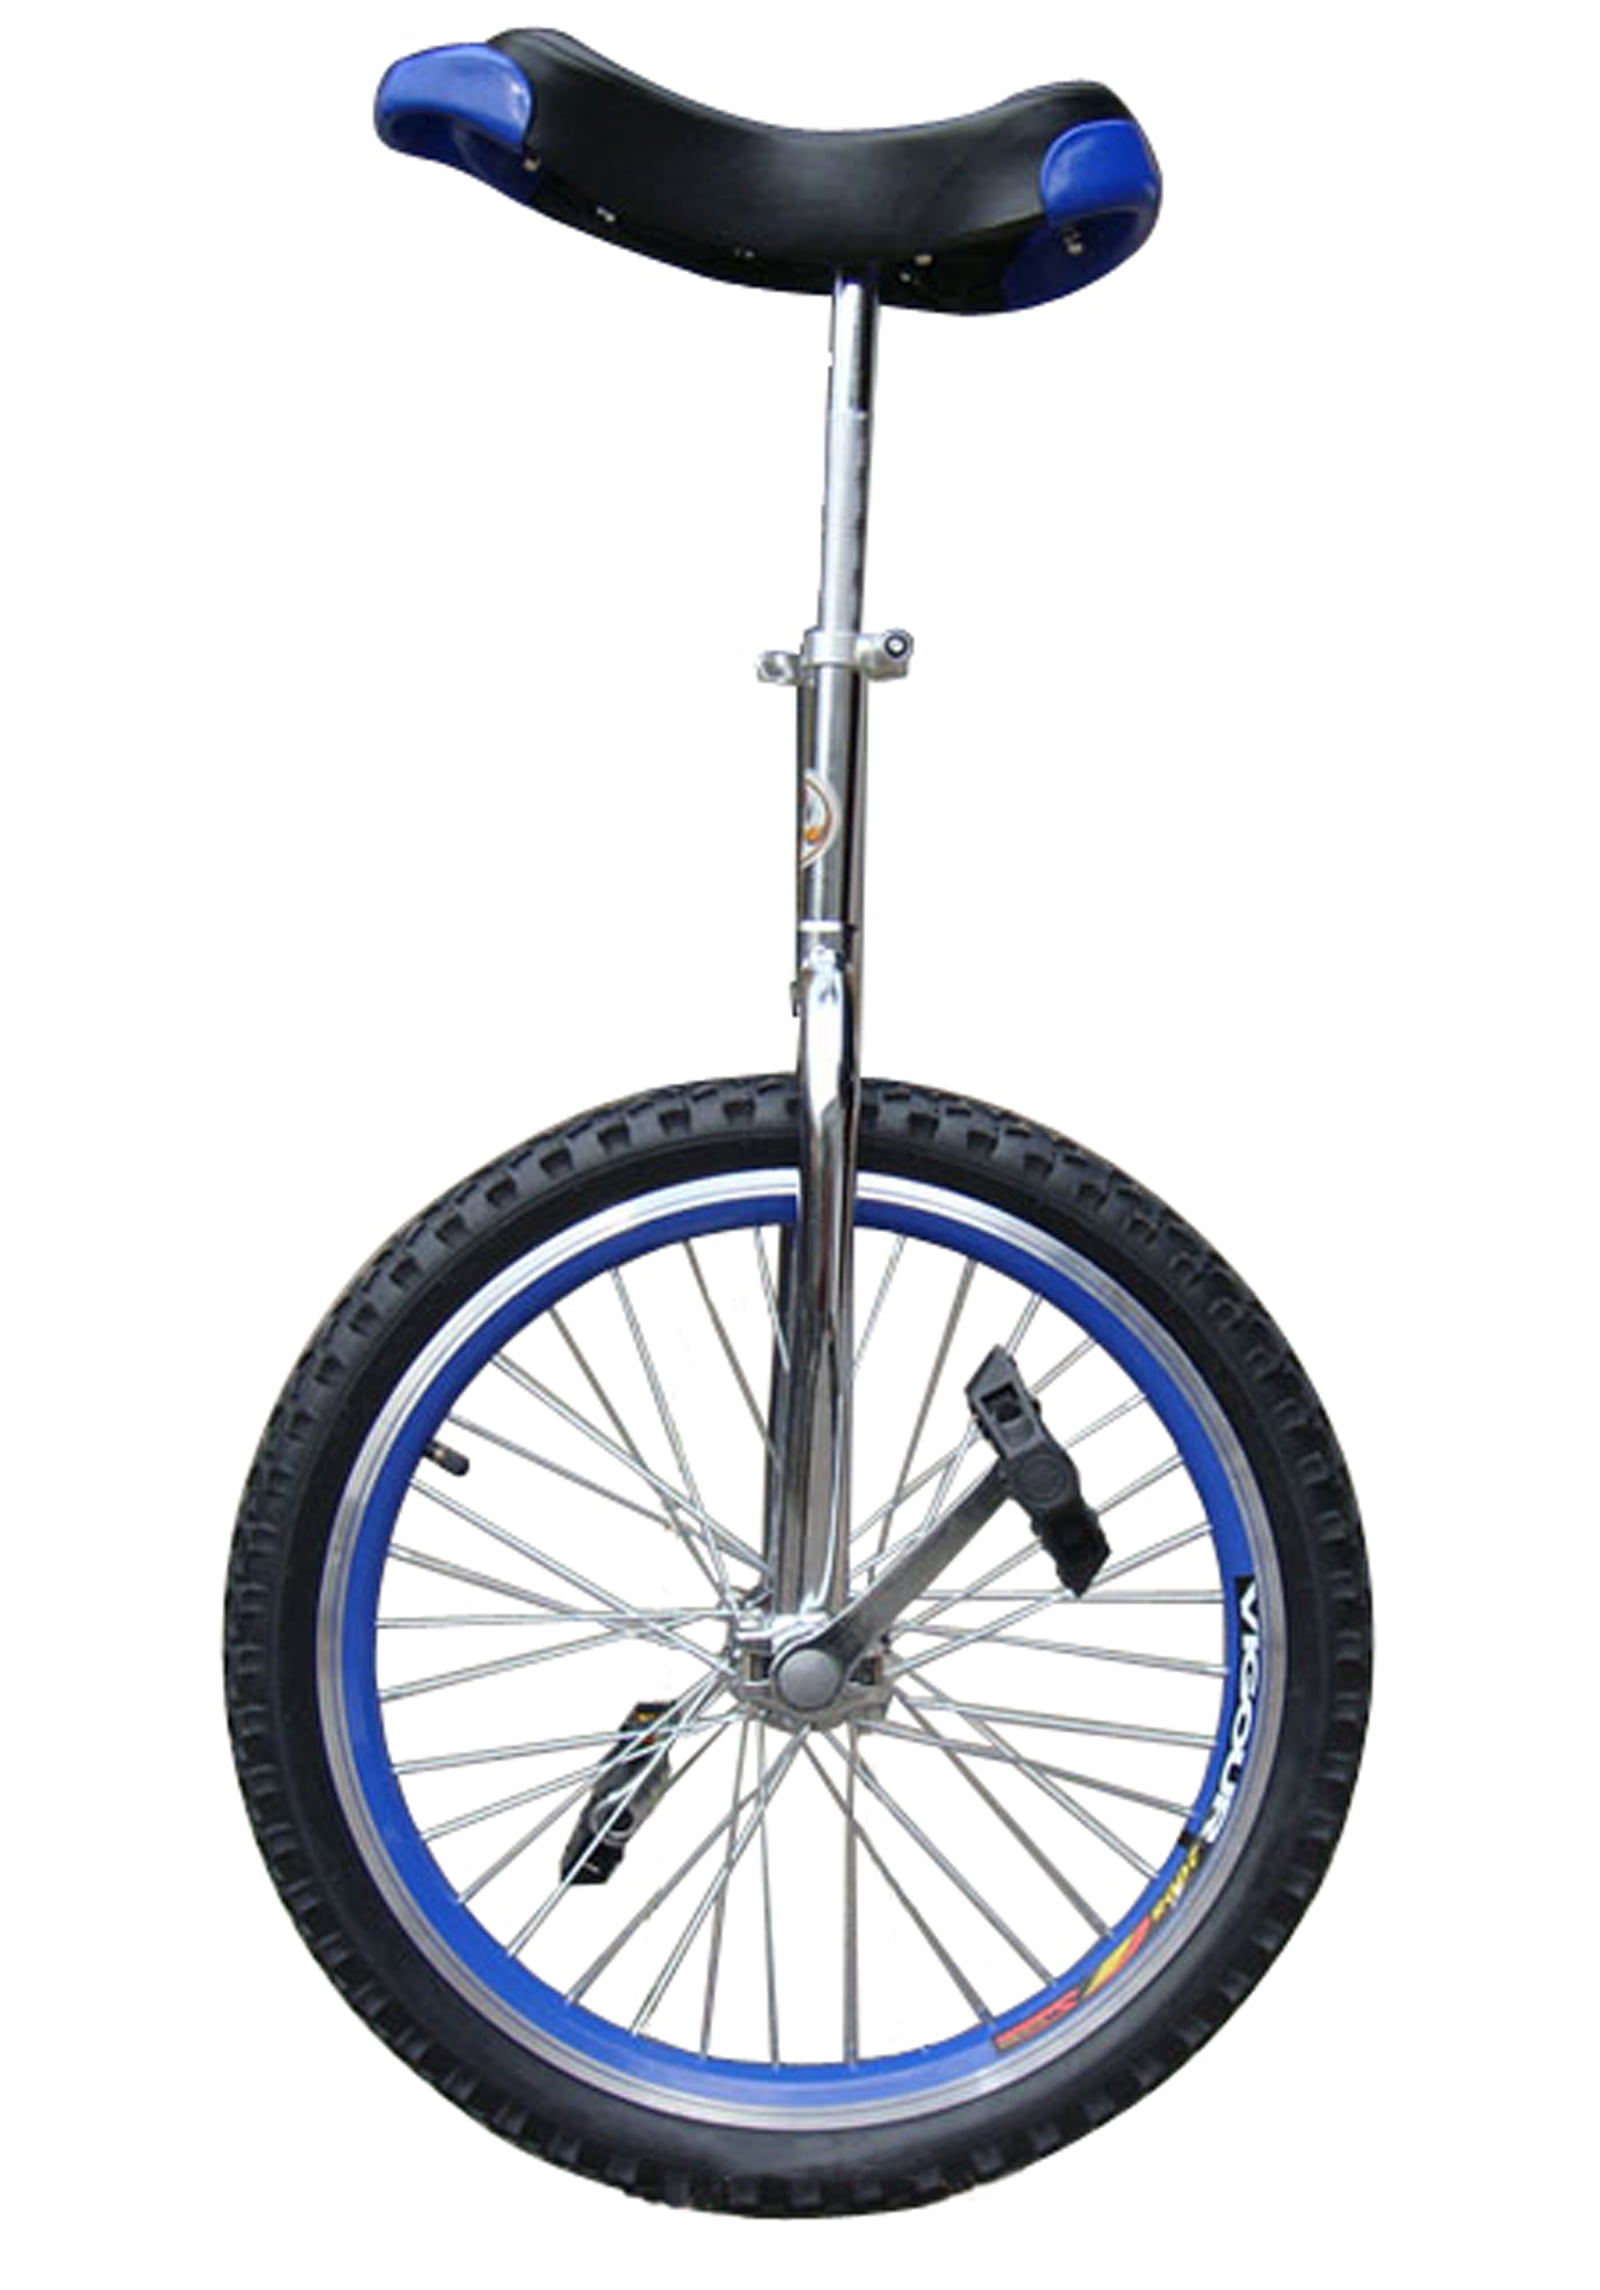 Lot of 2 Unicycle 16" Cycling In & Out Door Chrome colored New Great X'MAS Gift 